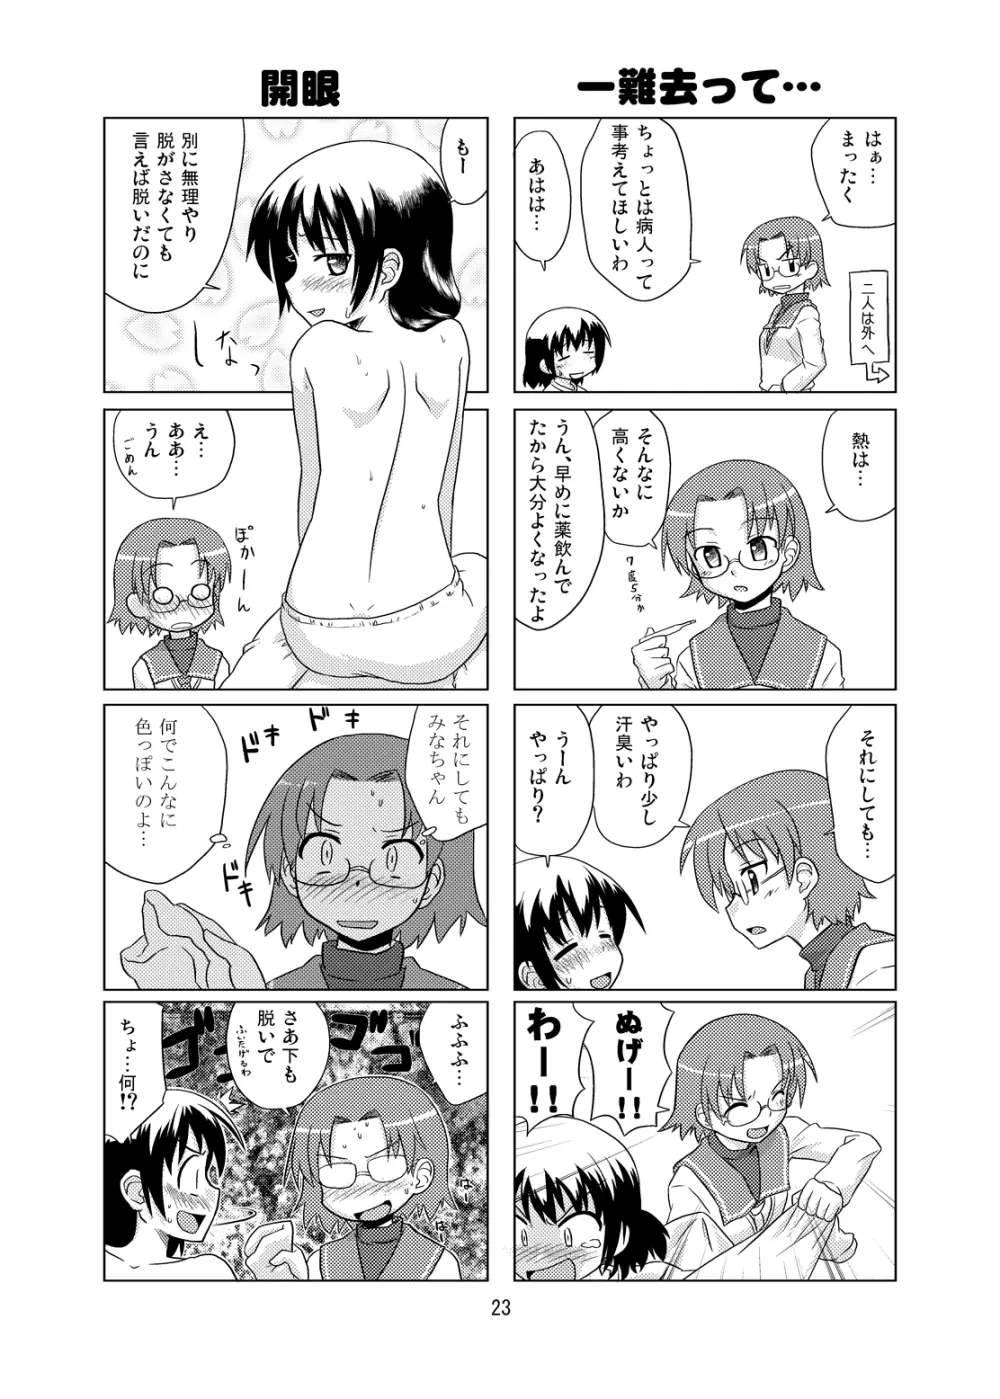 Composition Mix 8 はじマル！6 Page.22